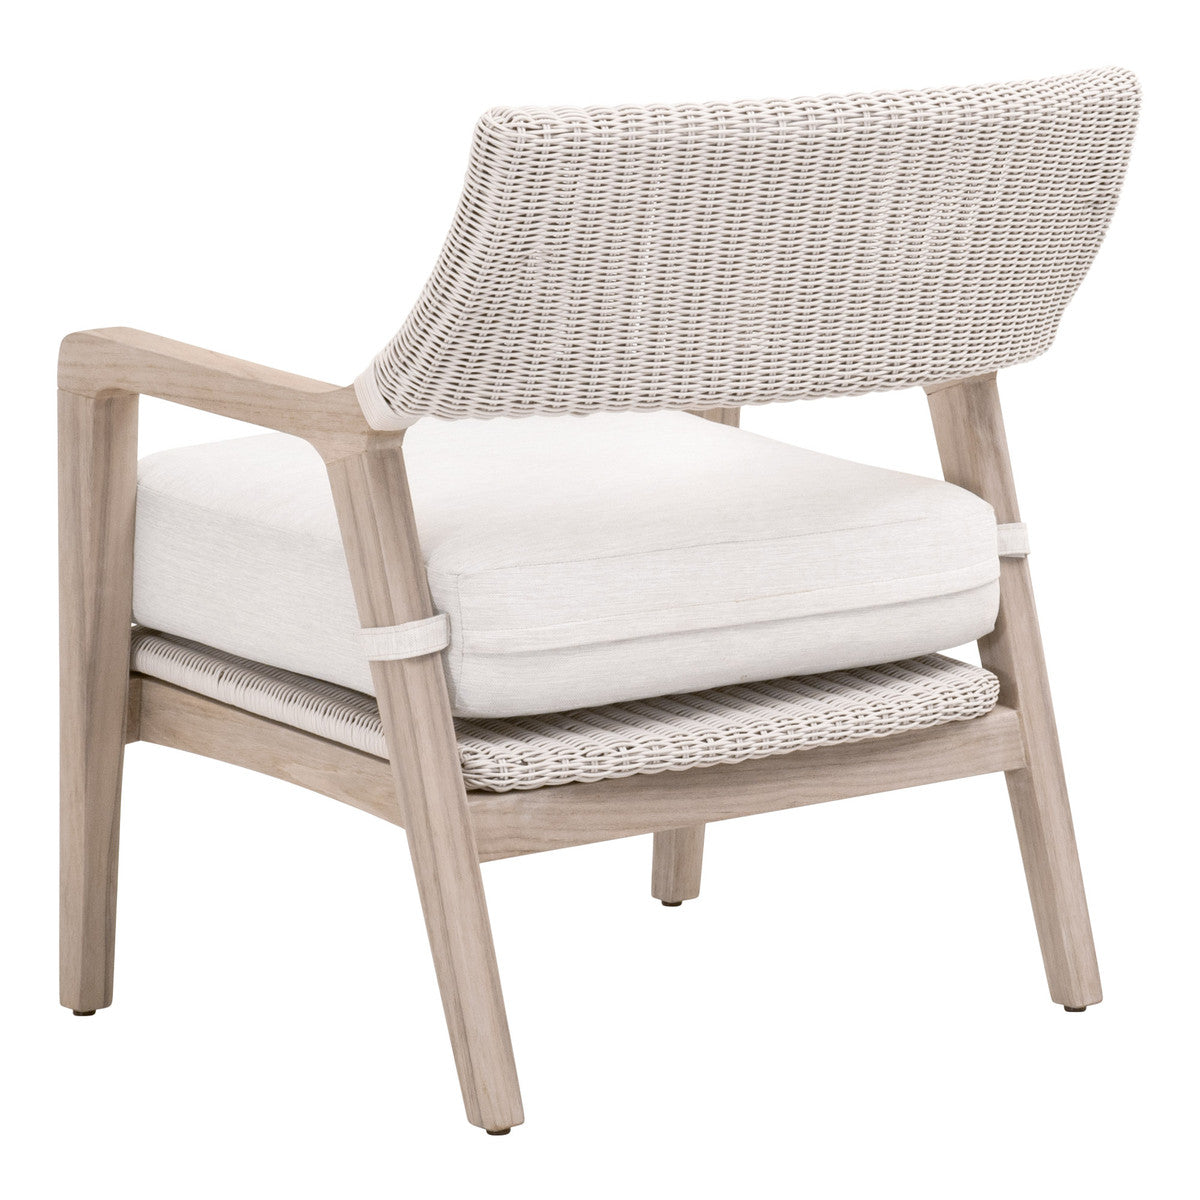 Lucia Outdoor Club Chair-Club Chairs-Essentials For Living-Sideboards and Things